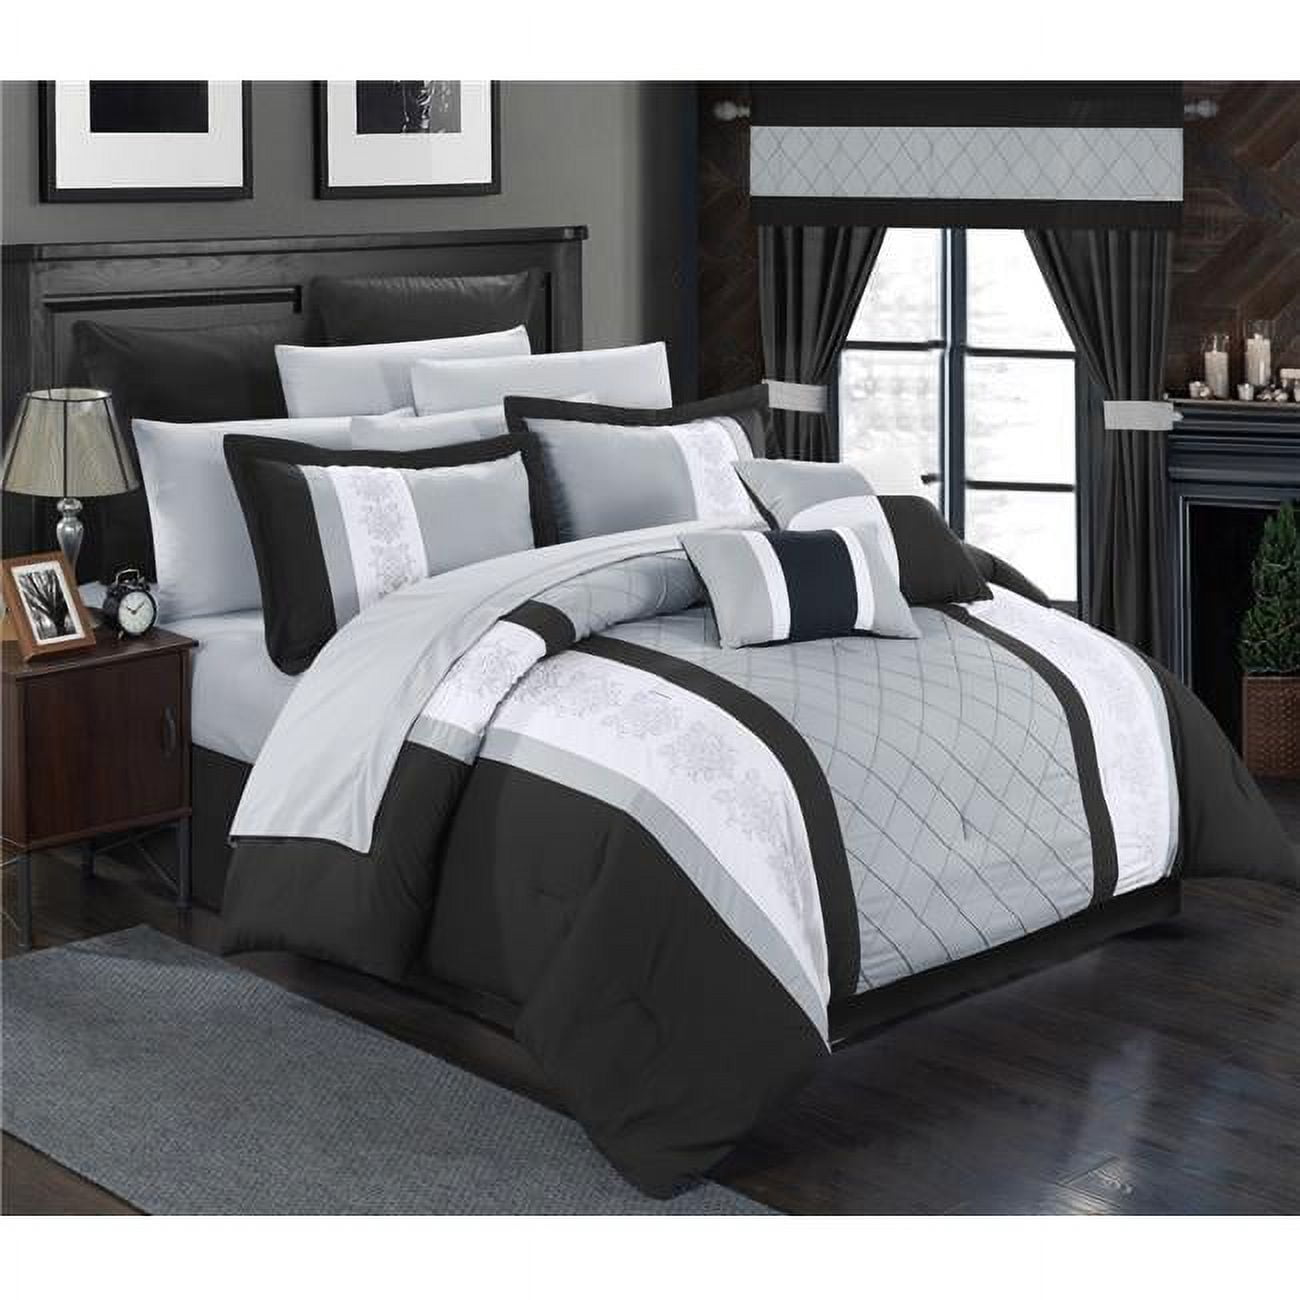 Aura Complete Pintuck Embroidery Color Block Bedding, Sheets, Window Panel Collection Bed In A Bag Comforter Set Sheets - King - 24 Piece